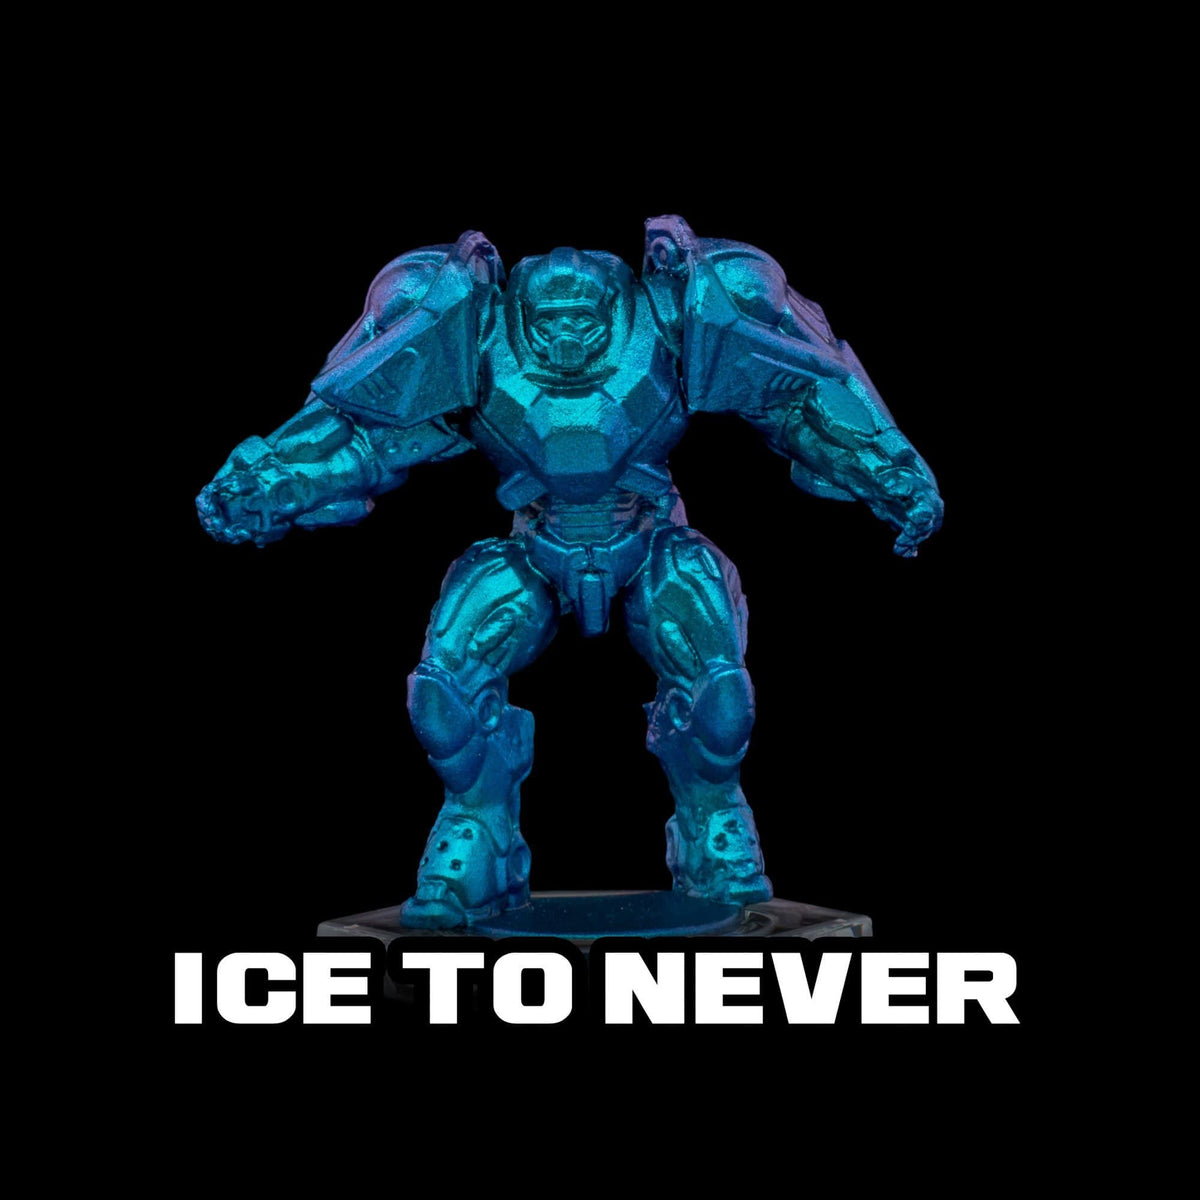 Ice to Never Colorshift Acrylic Paint Turboshift Turbo Dork Exit 23 Games Ice to Never Colorshift Acrylic Paint